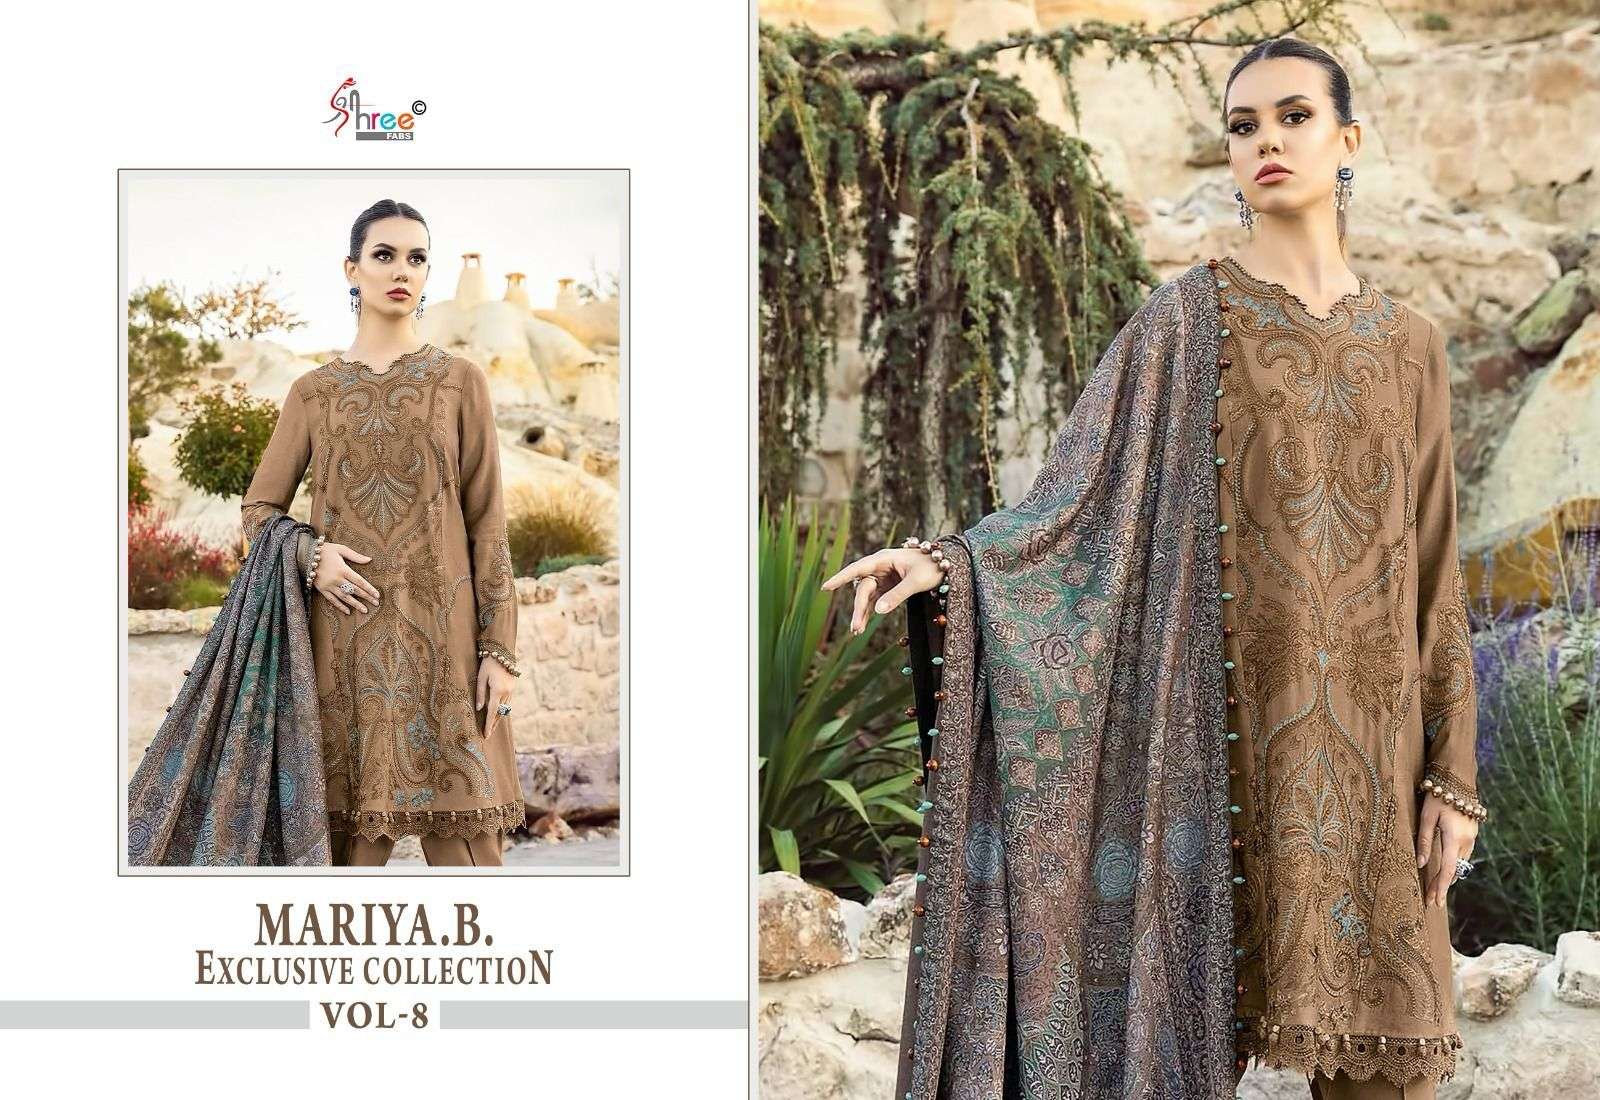 shree fabs maria b exclusive collection vol 8 rayon attrective look salwar suit with silver duaptta catalog